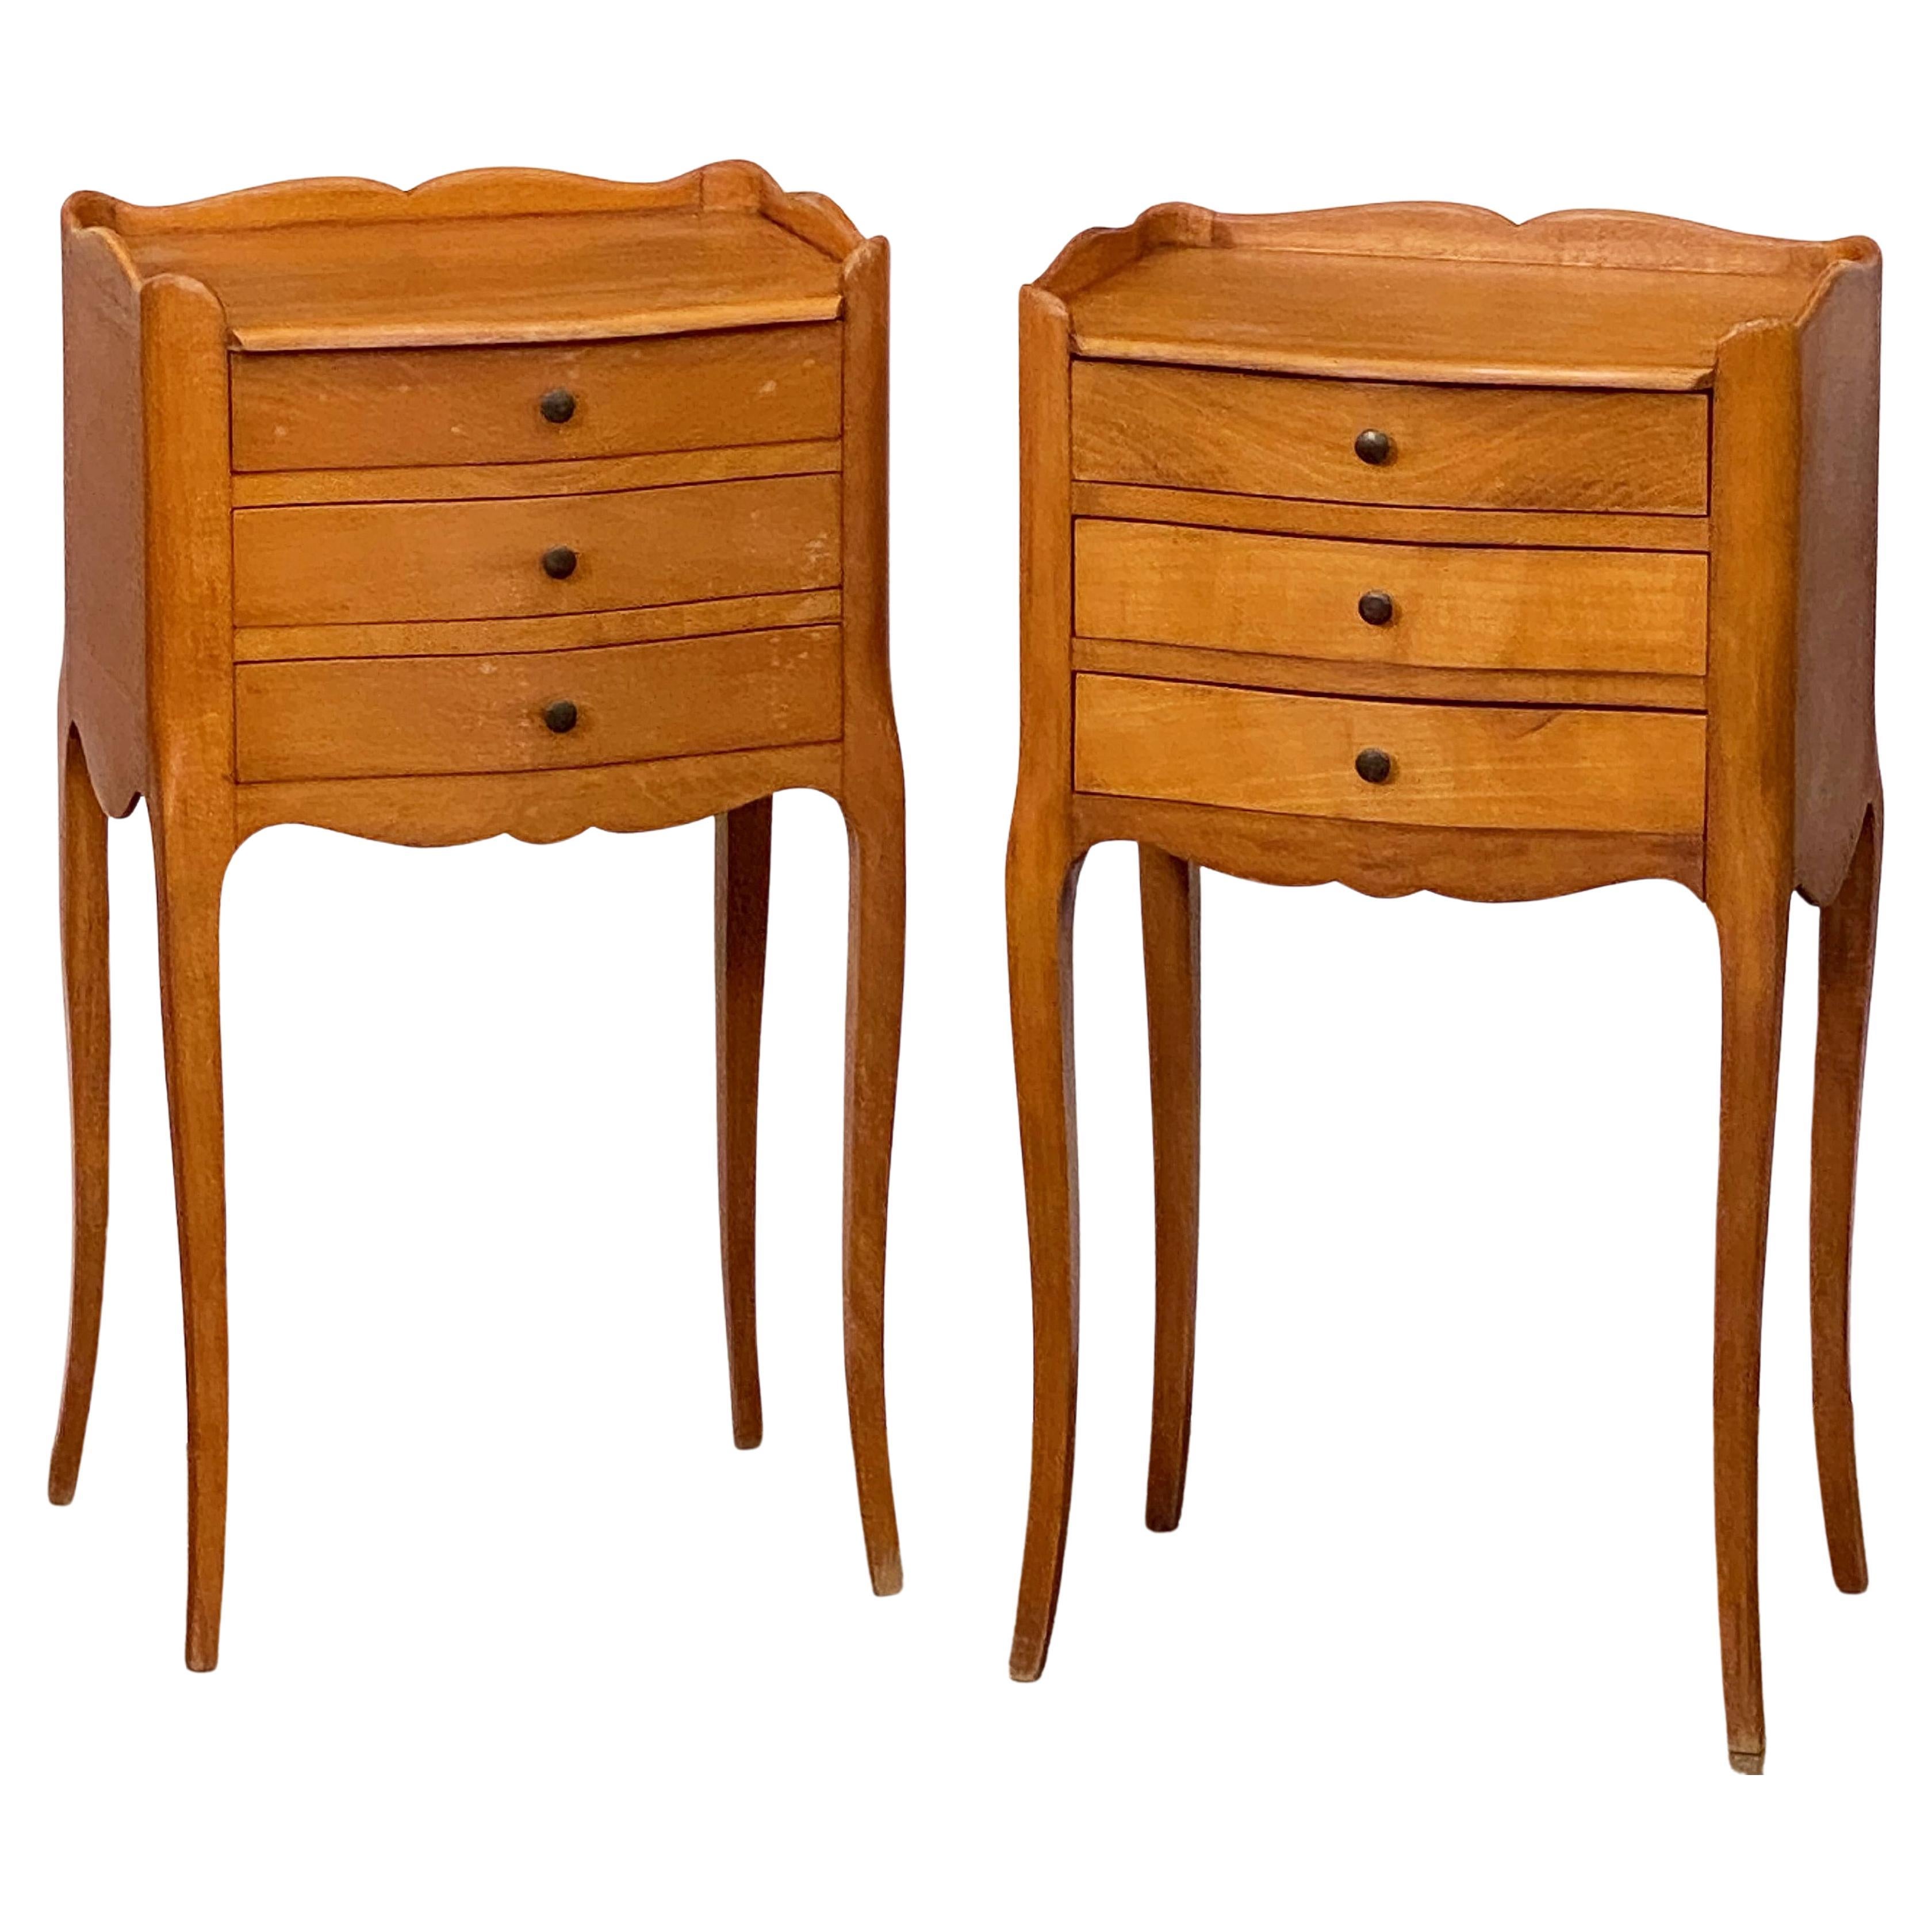 Pair of French Cabriole Leg Nightstands or Bedside Tables